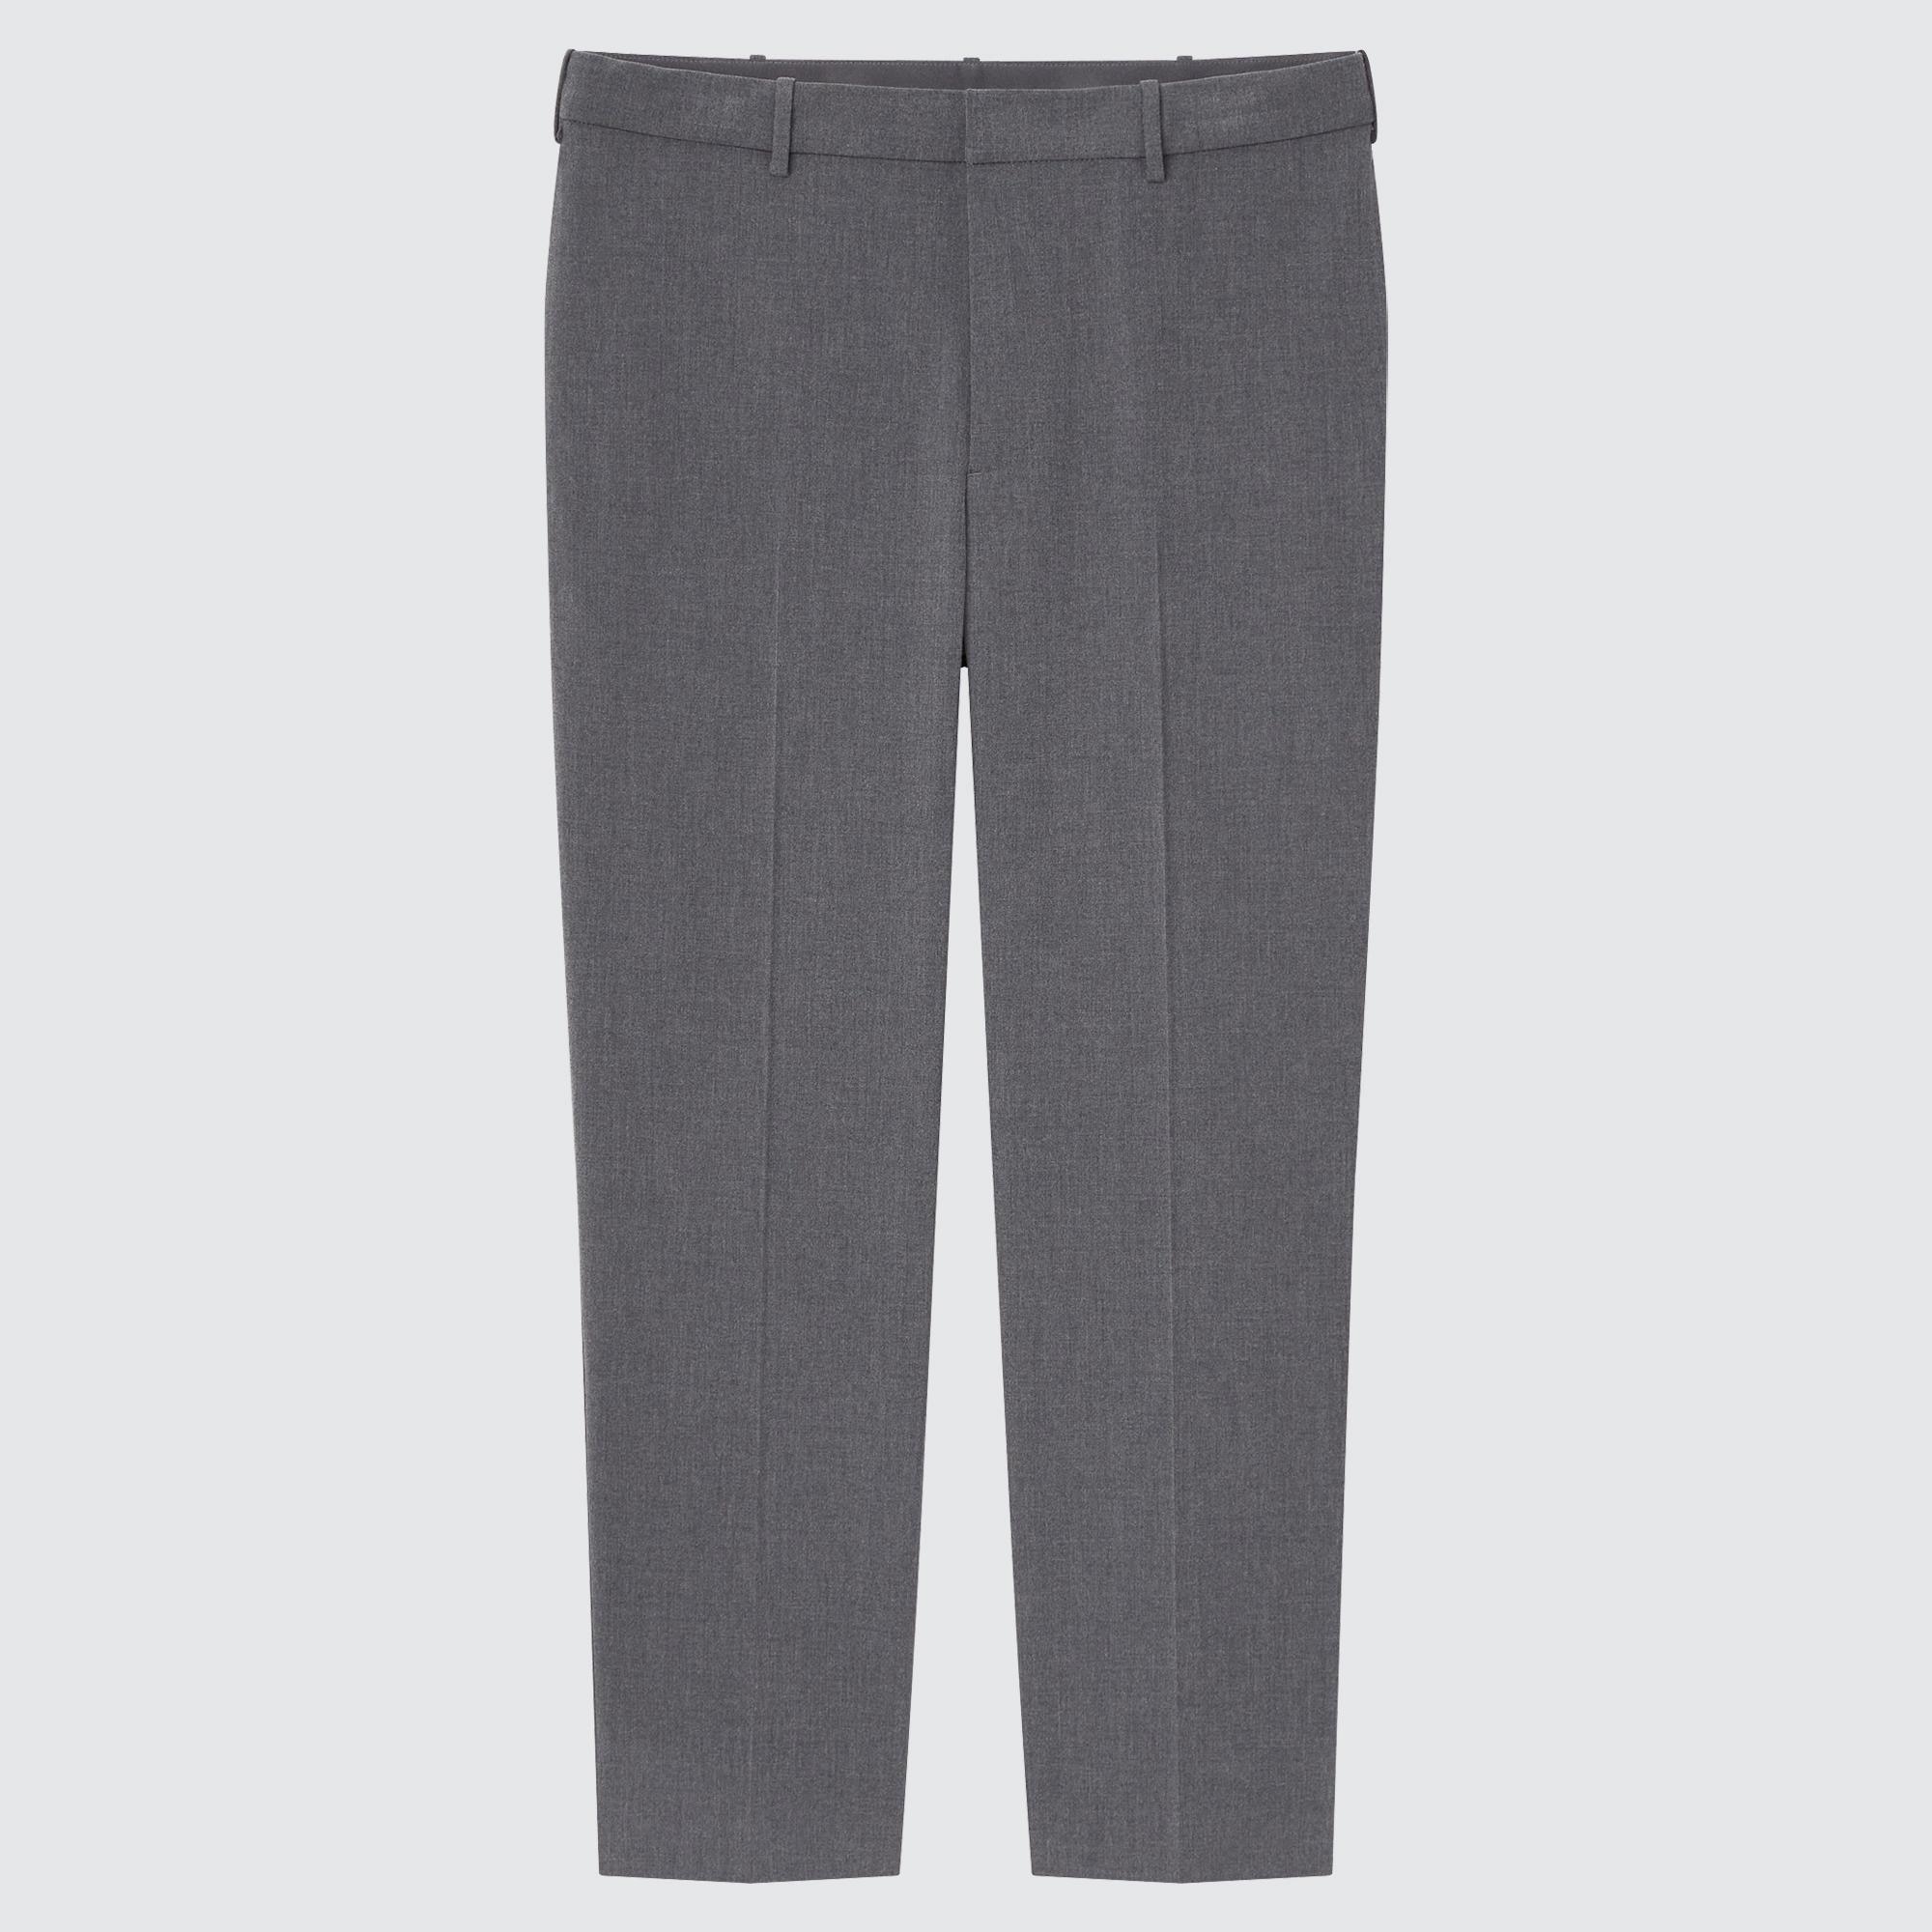 Plus Exclusive Talbots Chatham Ankle Pants - Harvesting Check | Talbots